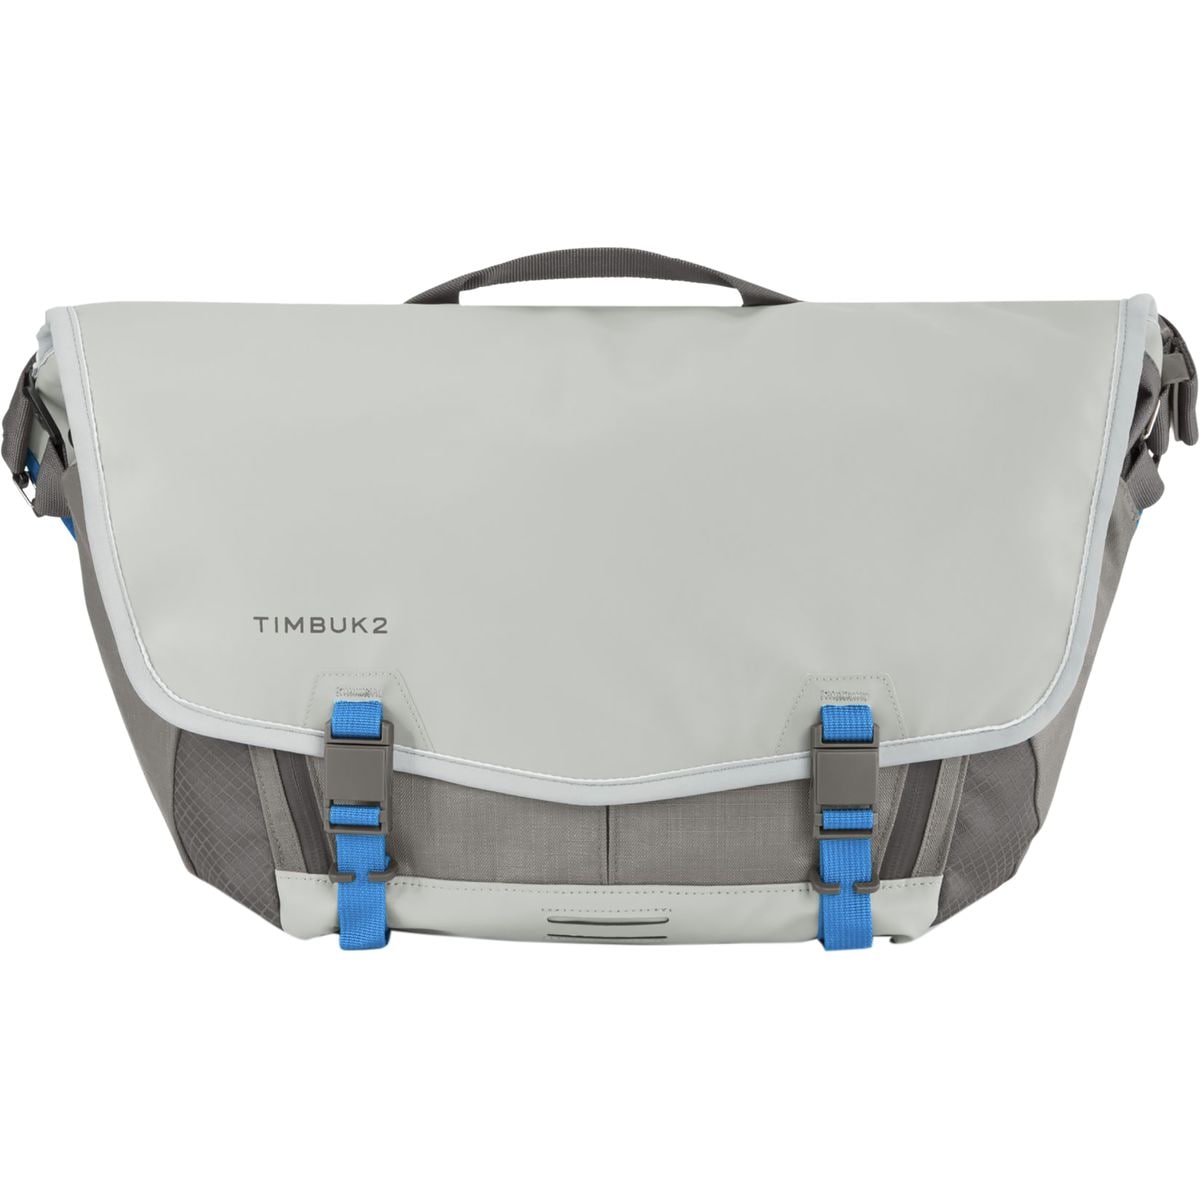 Buy Timbuk2 Especial Messenger from Outnorth